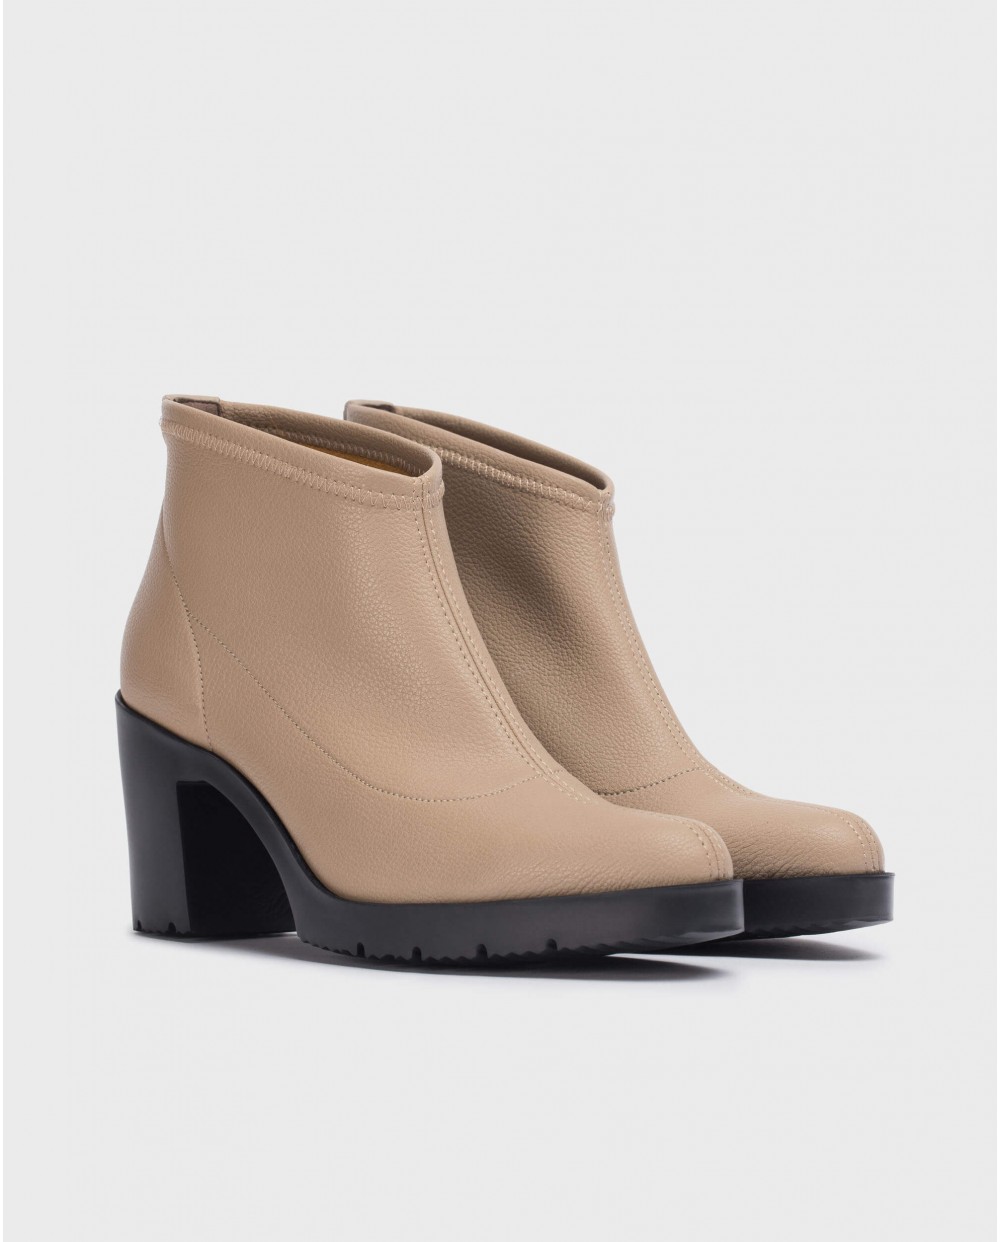 Wonders-Ankle Boots-Brown Jess II lycra ankle boot